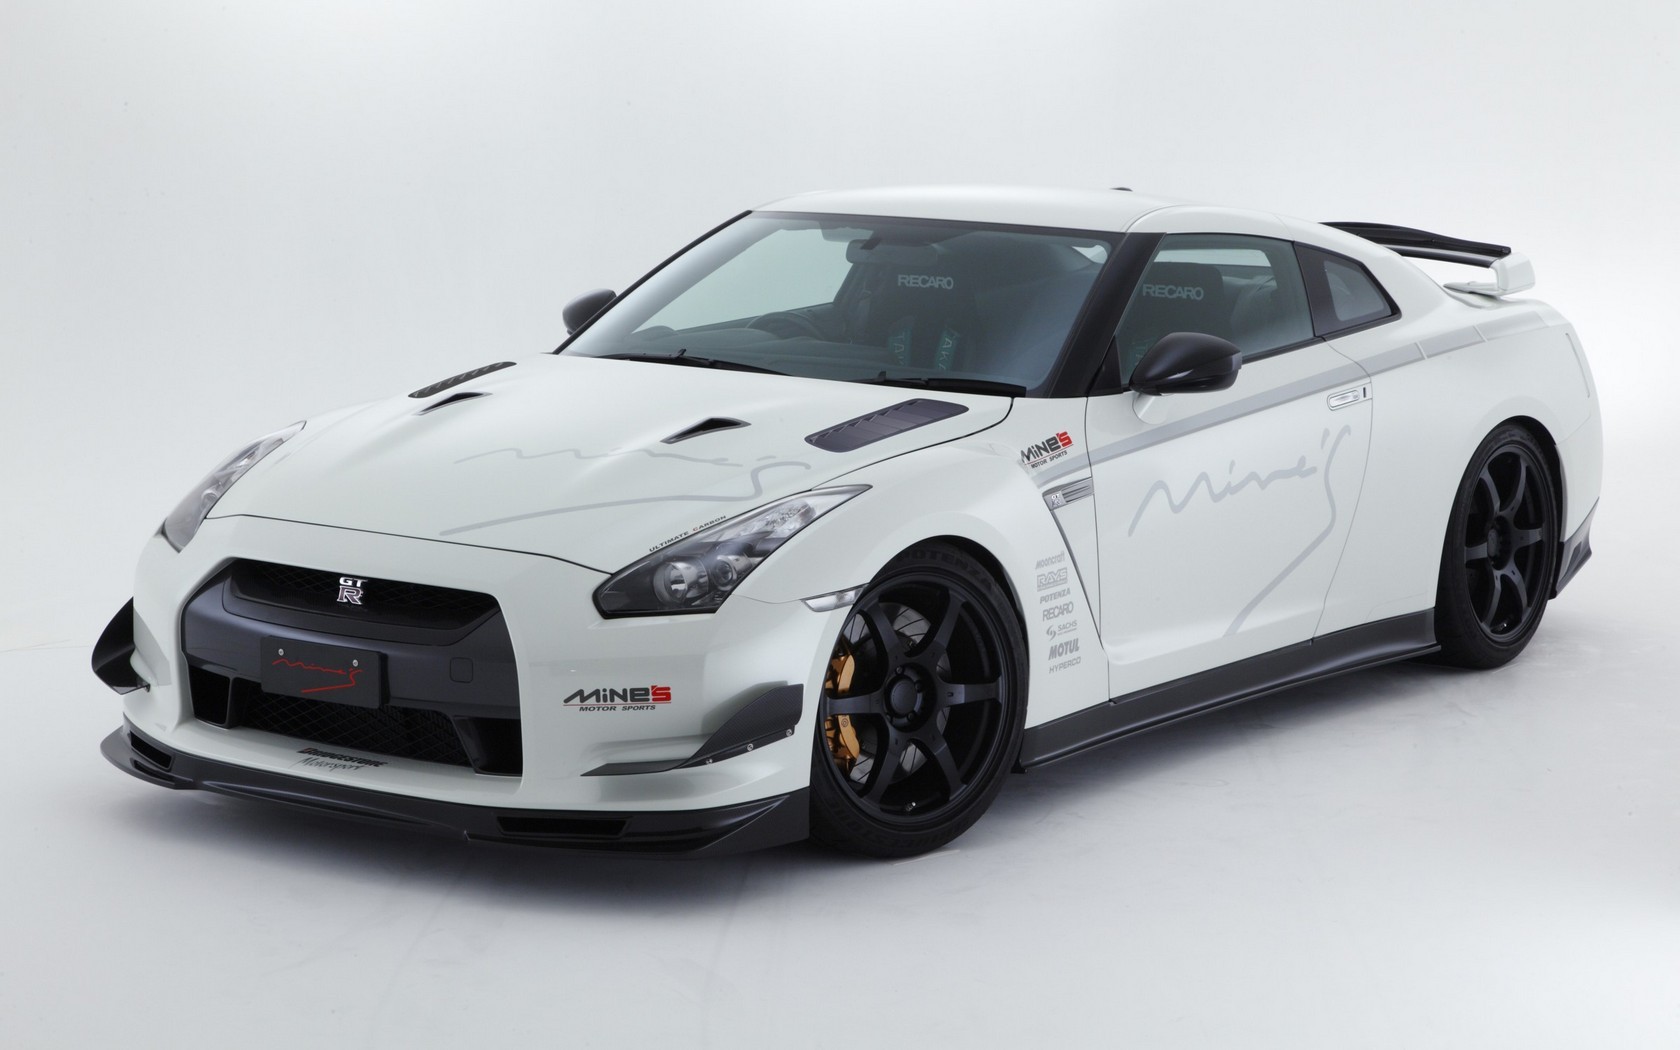 Nissan Skyline R35 Wallpaper 5439 Hd Wallpapers in Cars   Imagescicom